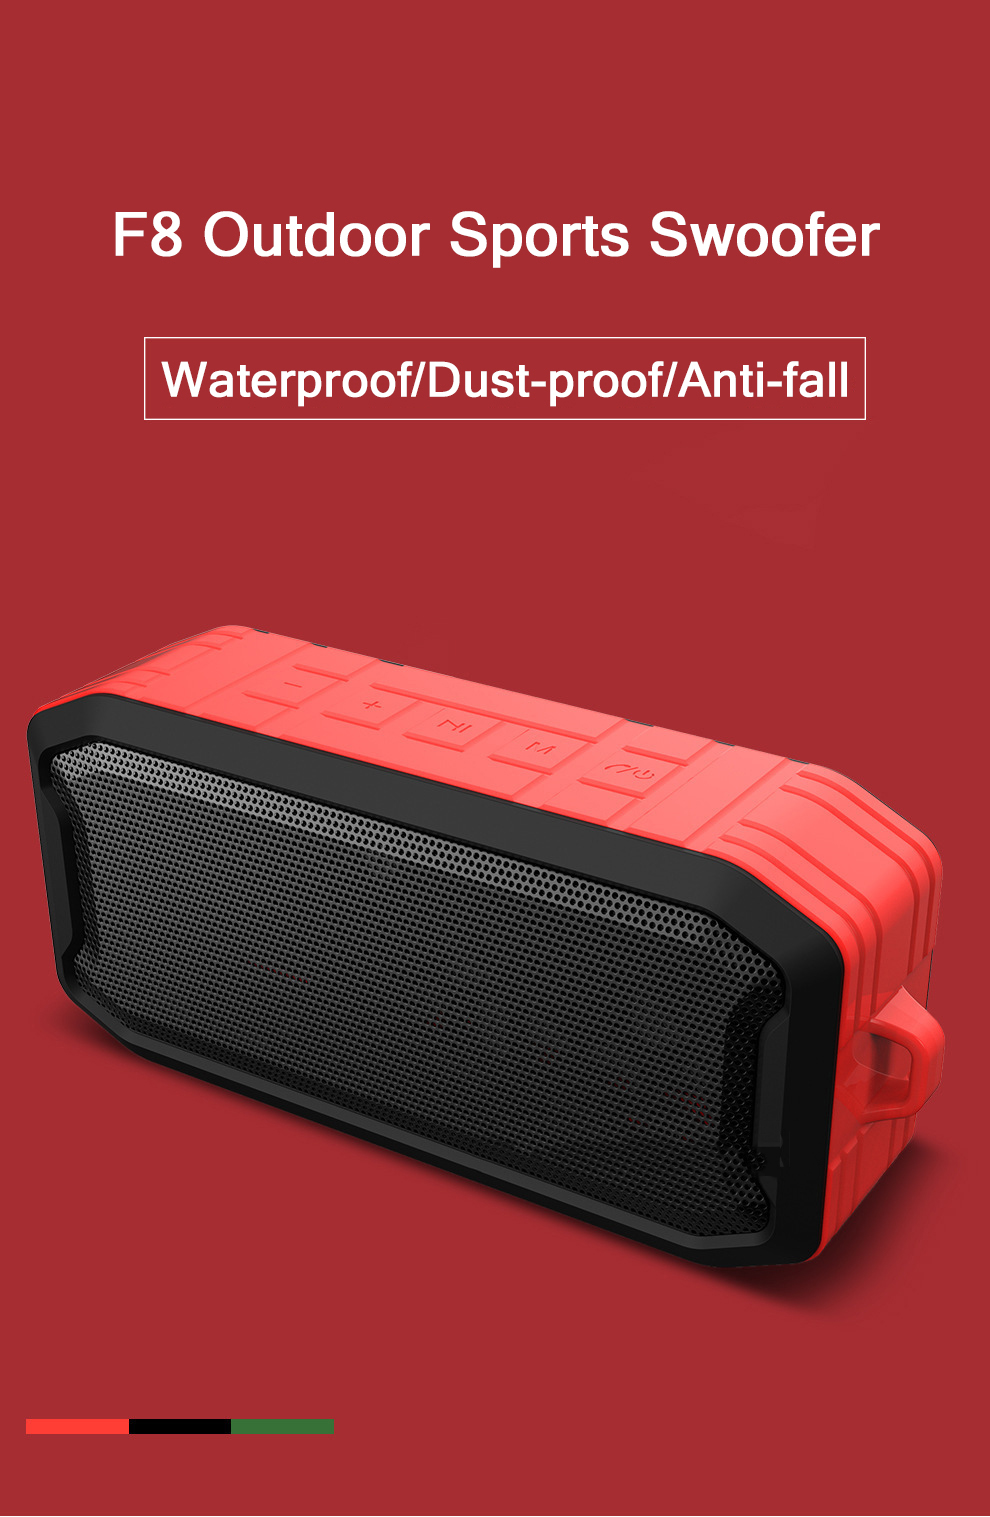 Bakeey-bluetooth-50-Waterproof-Speaker-with-USB-Flash-Drive-TF-Card-Playback-Subwoofer-TWS-Wireless--1700682-1